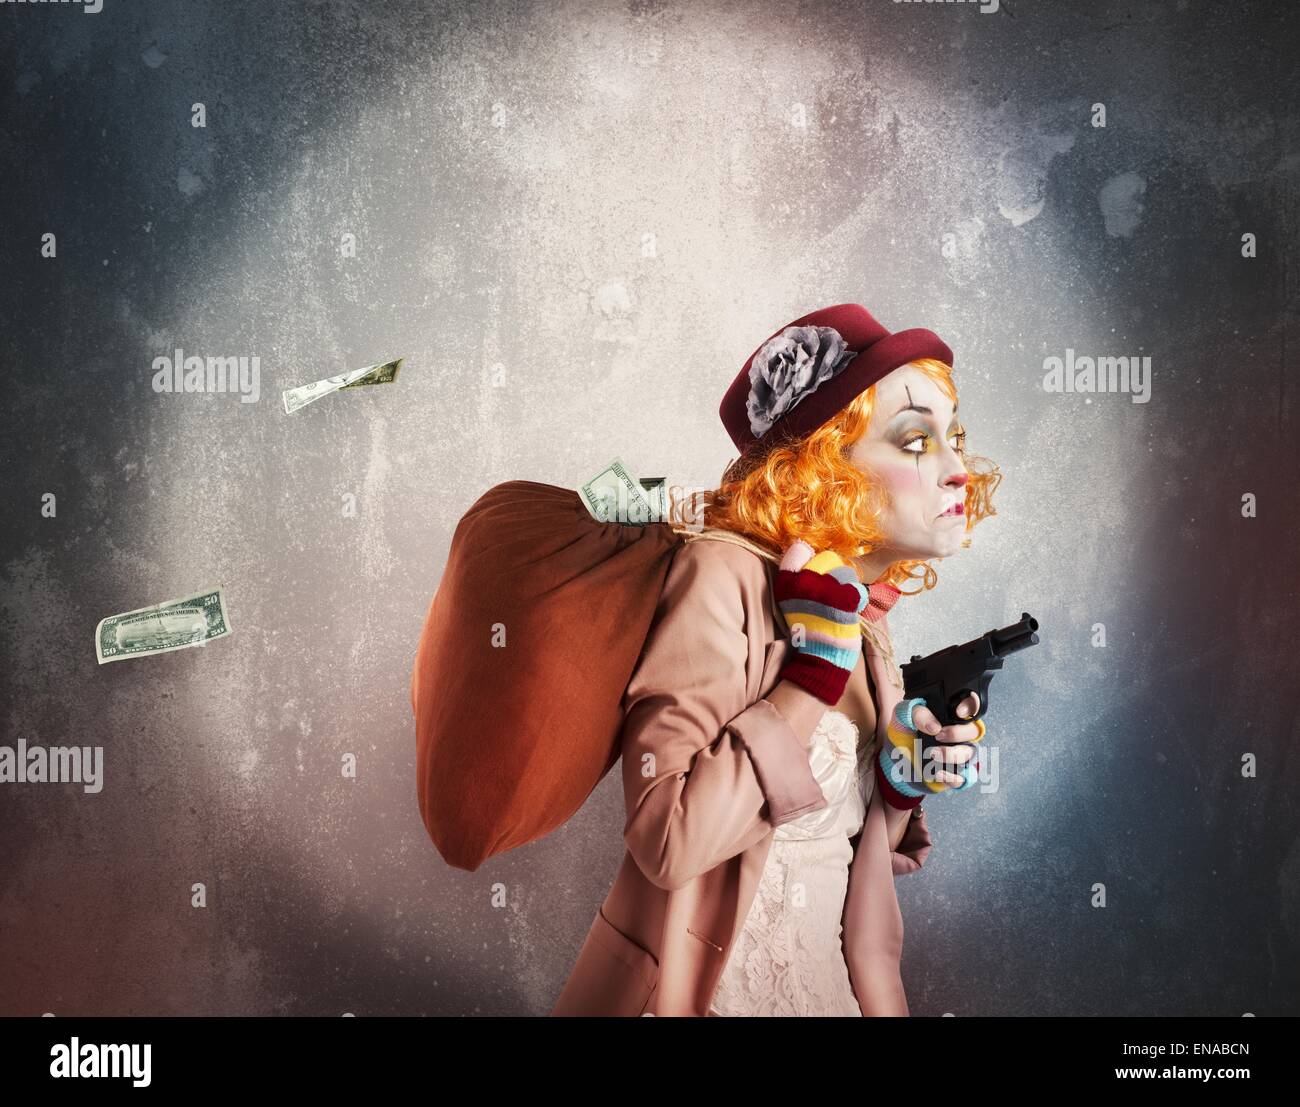 Clown discovered while robbing Stock Photo